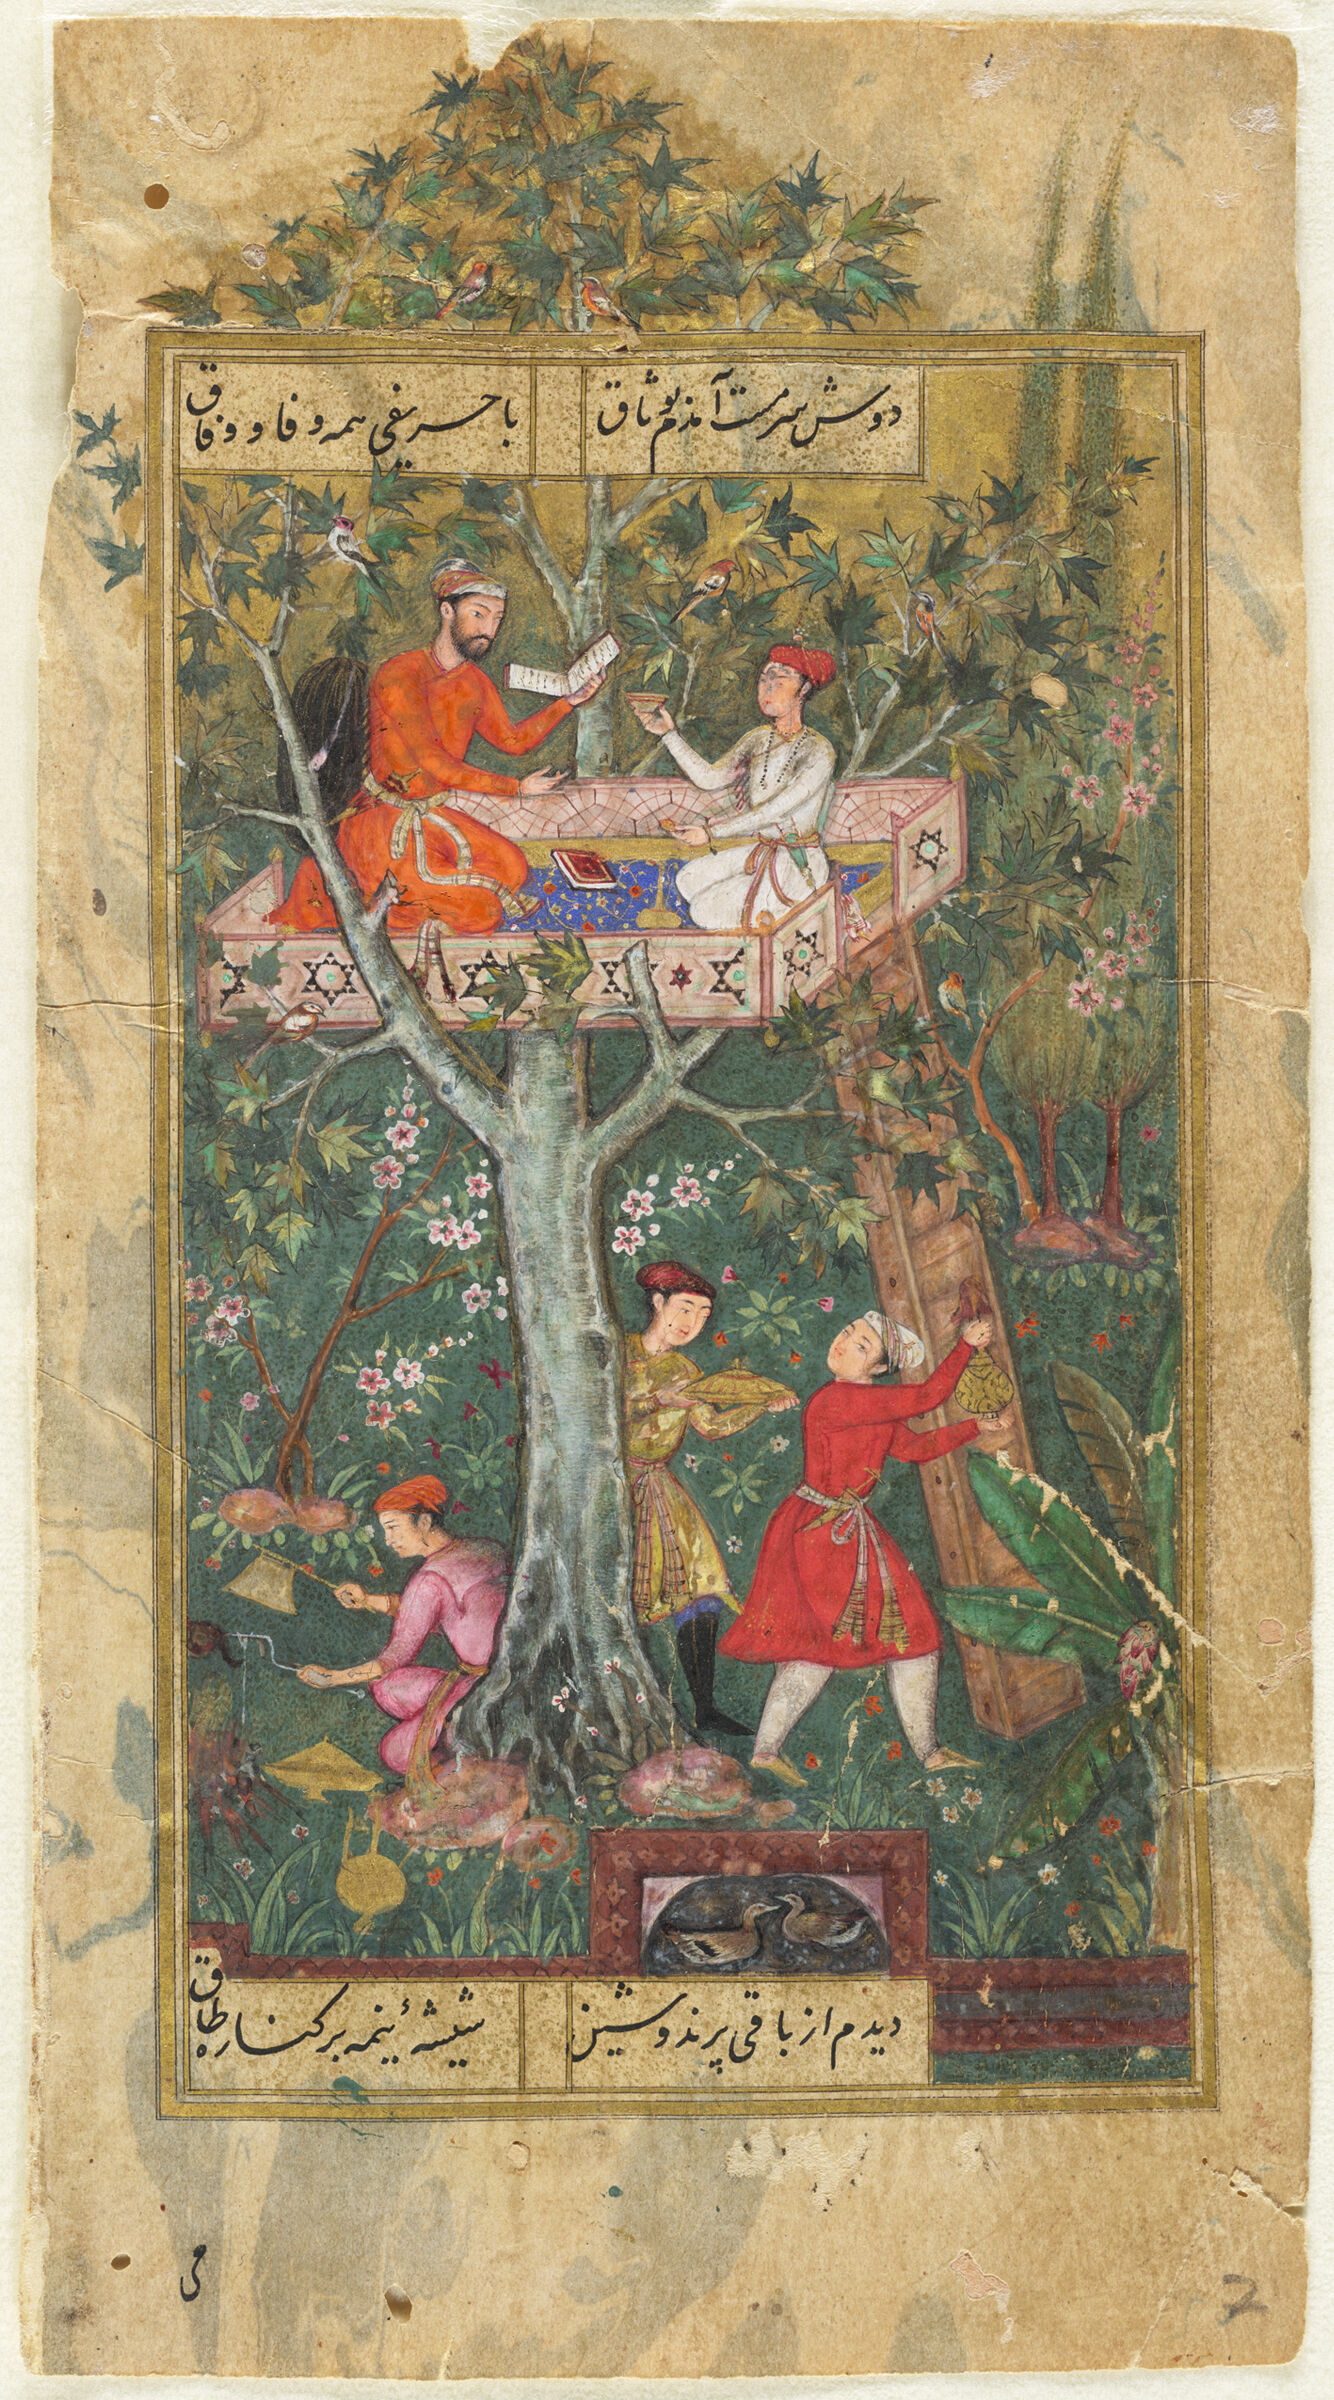 Anvari Entertains In A Summer House (Painting, Verso; Text, Recto), Folio 109 From A Manuscript Of The Divan Of Anvari